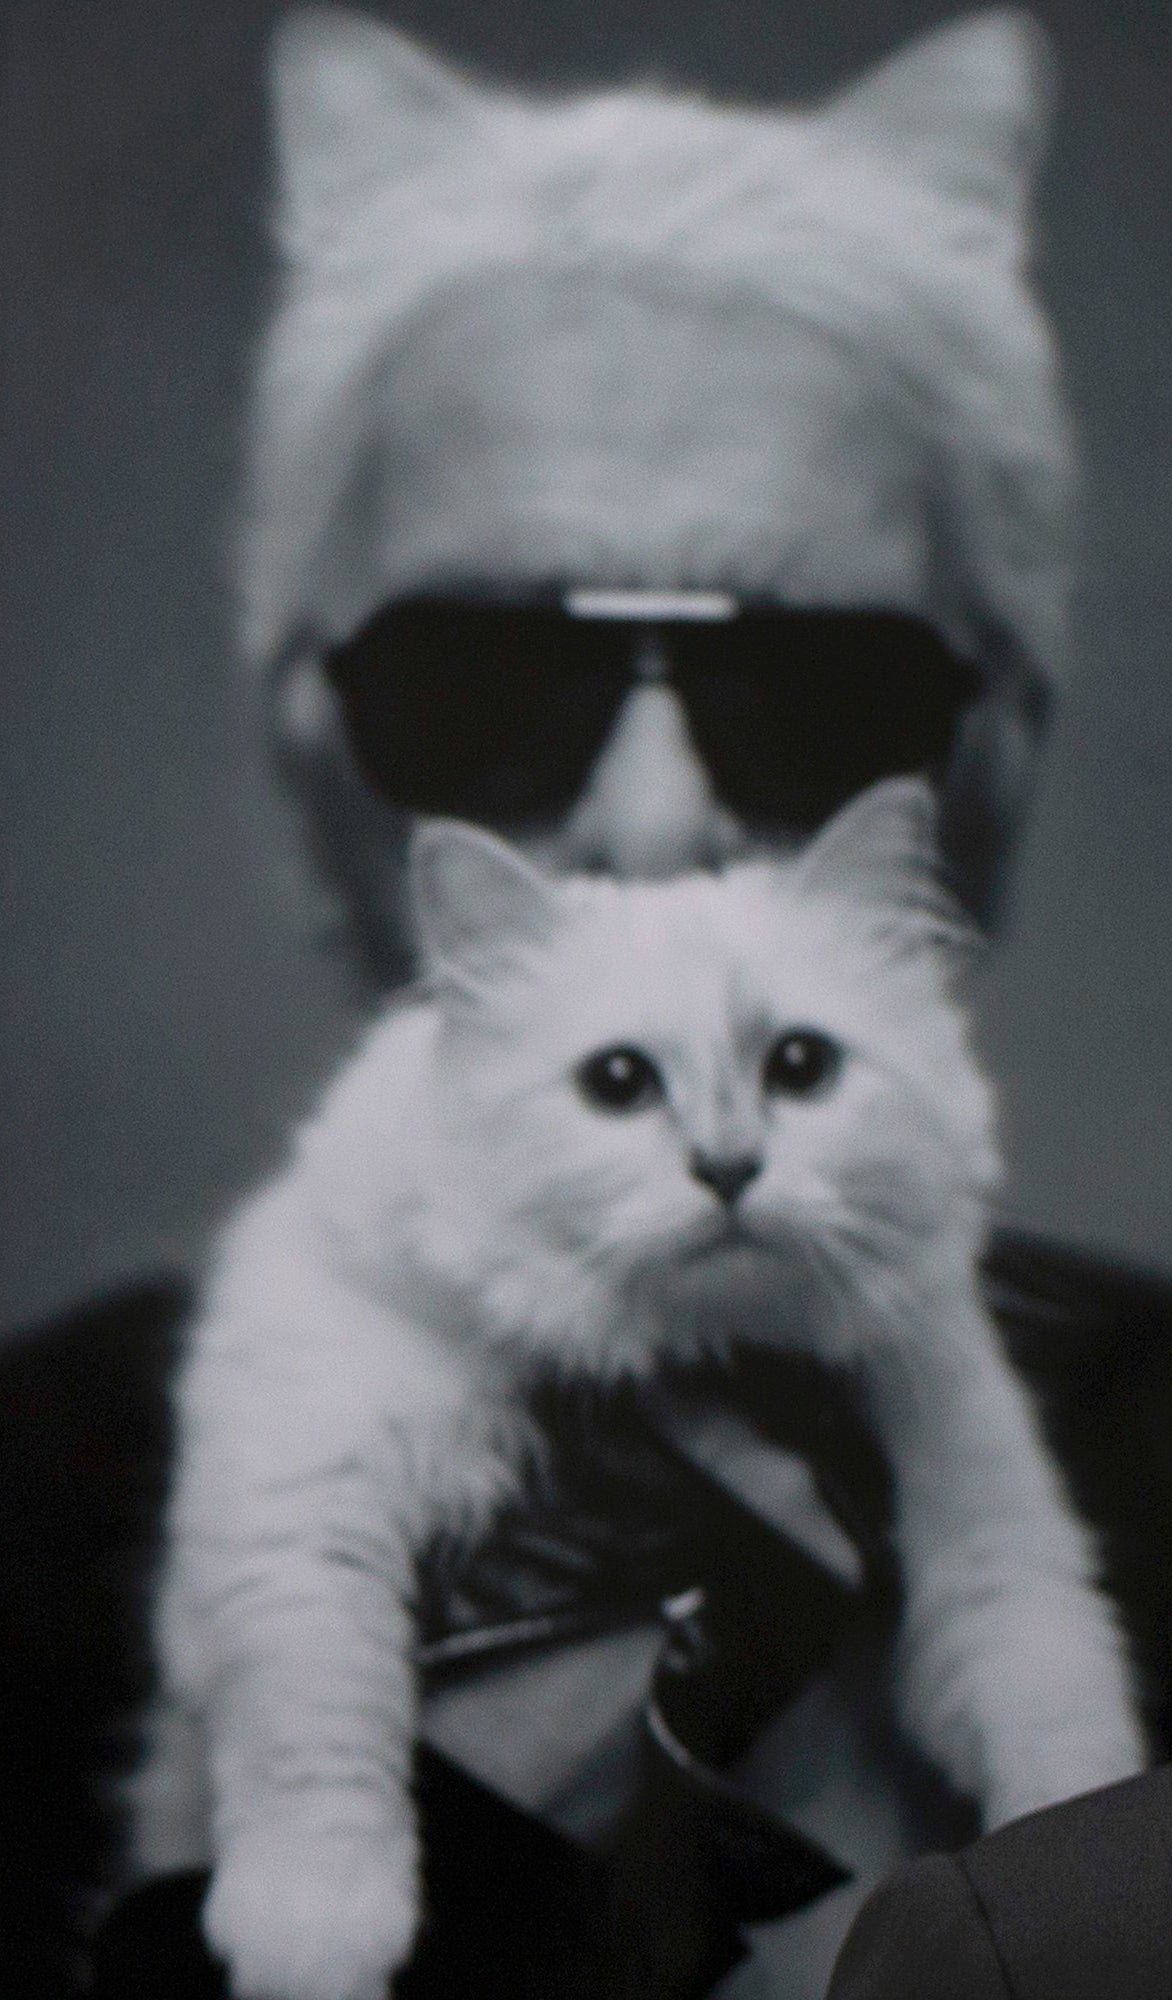 Karl Lagerfeld holding up his cat Choupette